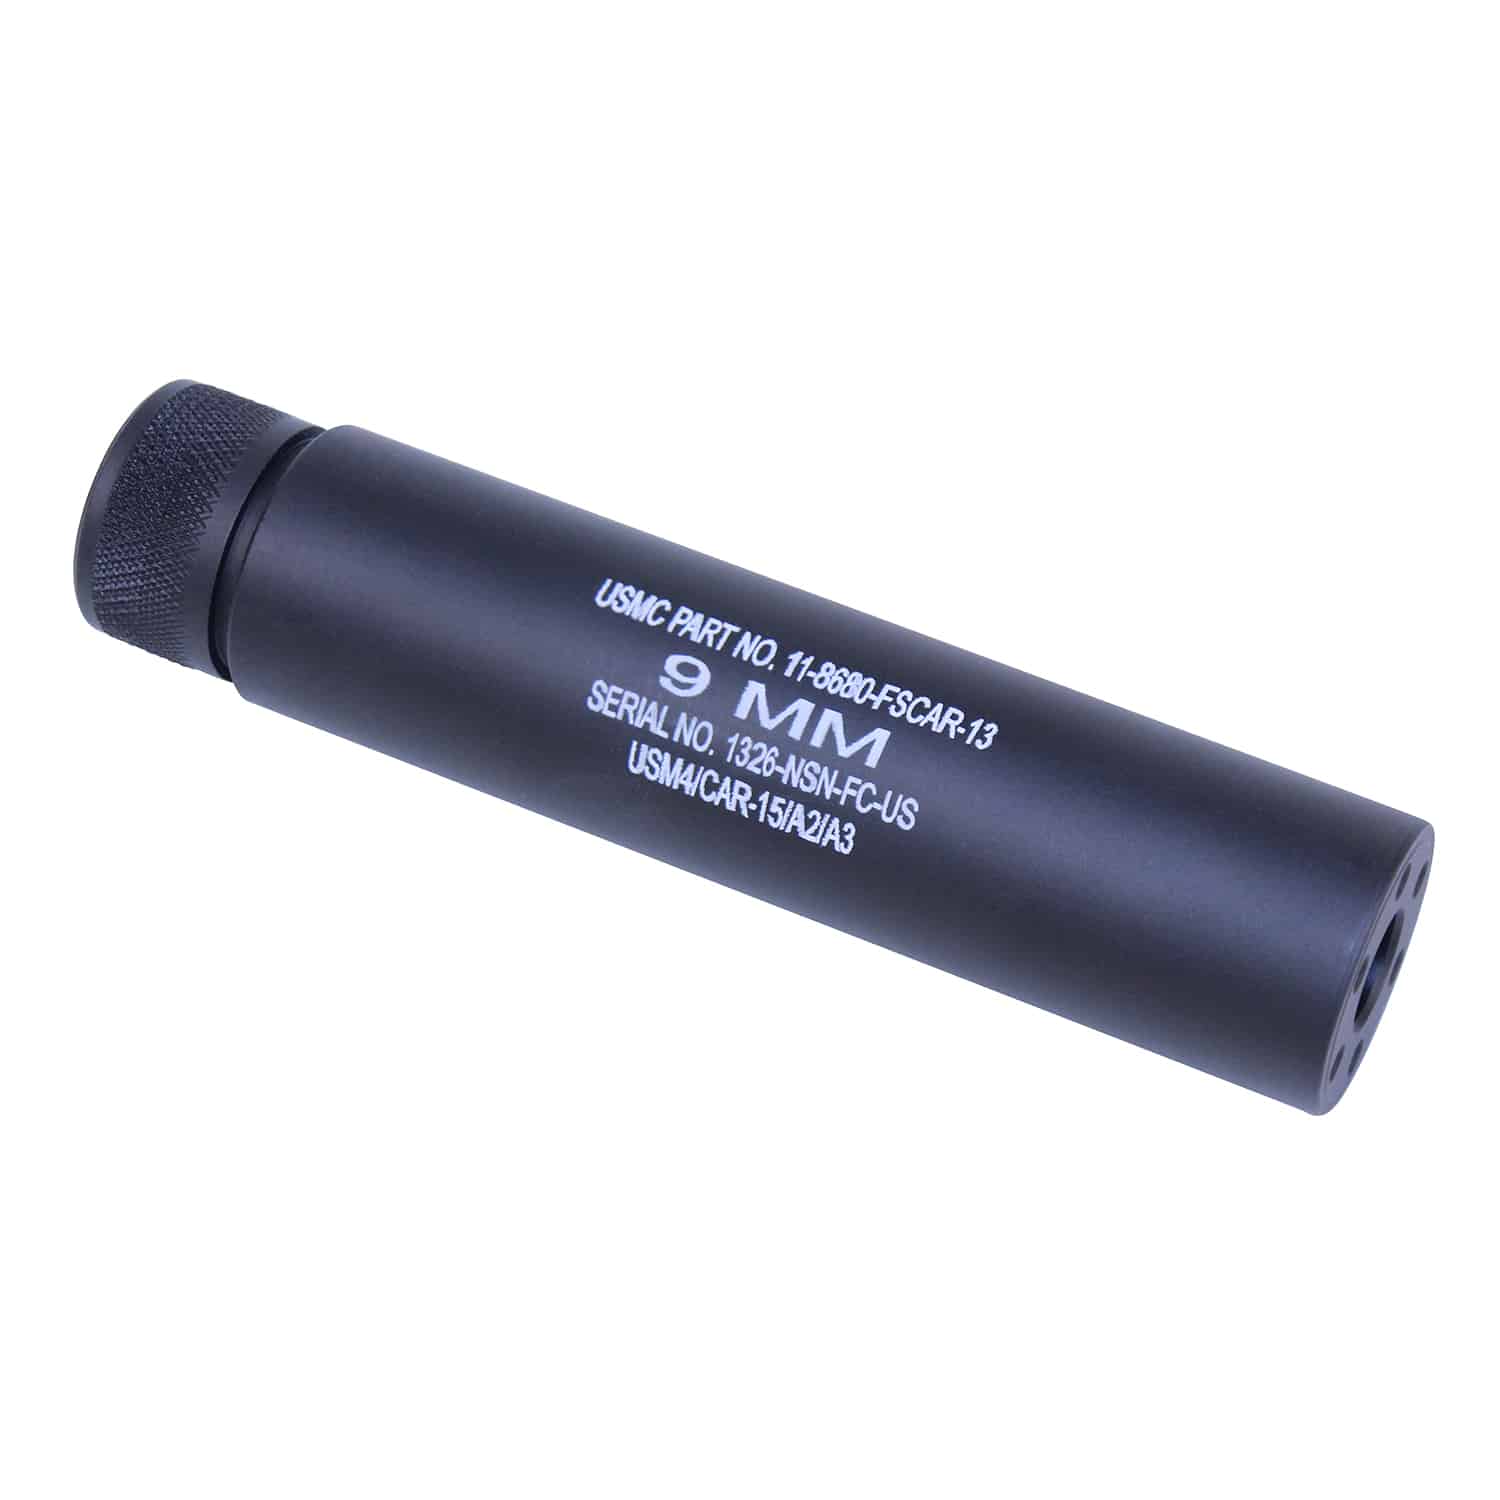 Black anodized 5.5-inch AR-15 mock suppressor for 9mm engraved